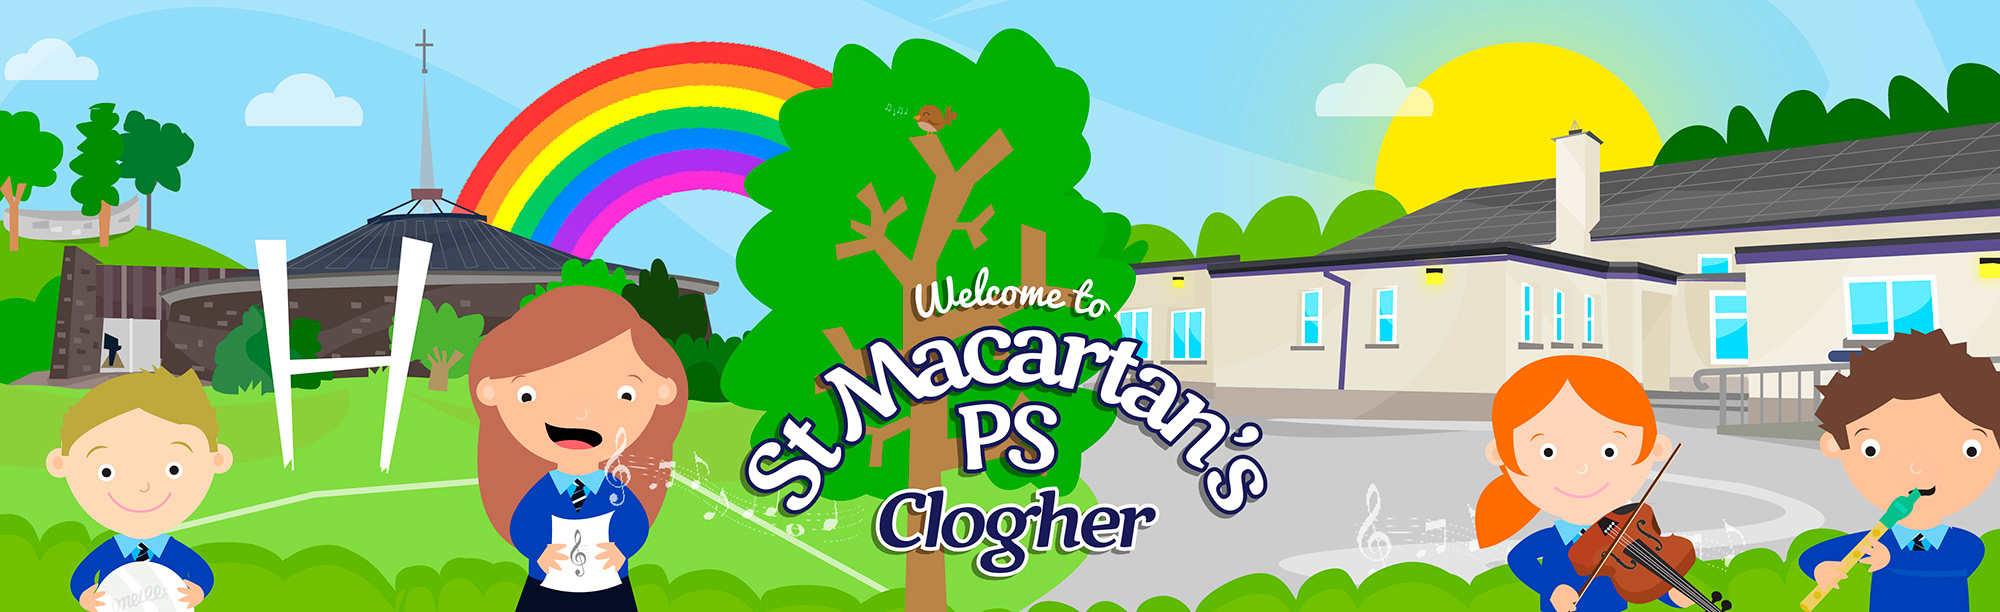 St Maccartans Primary School, Clogher